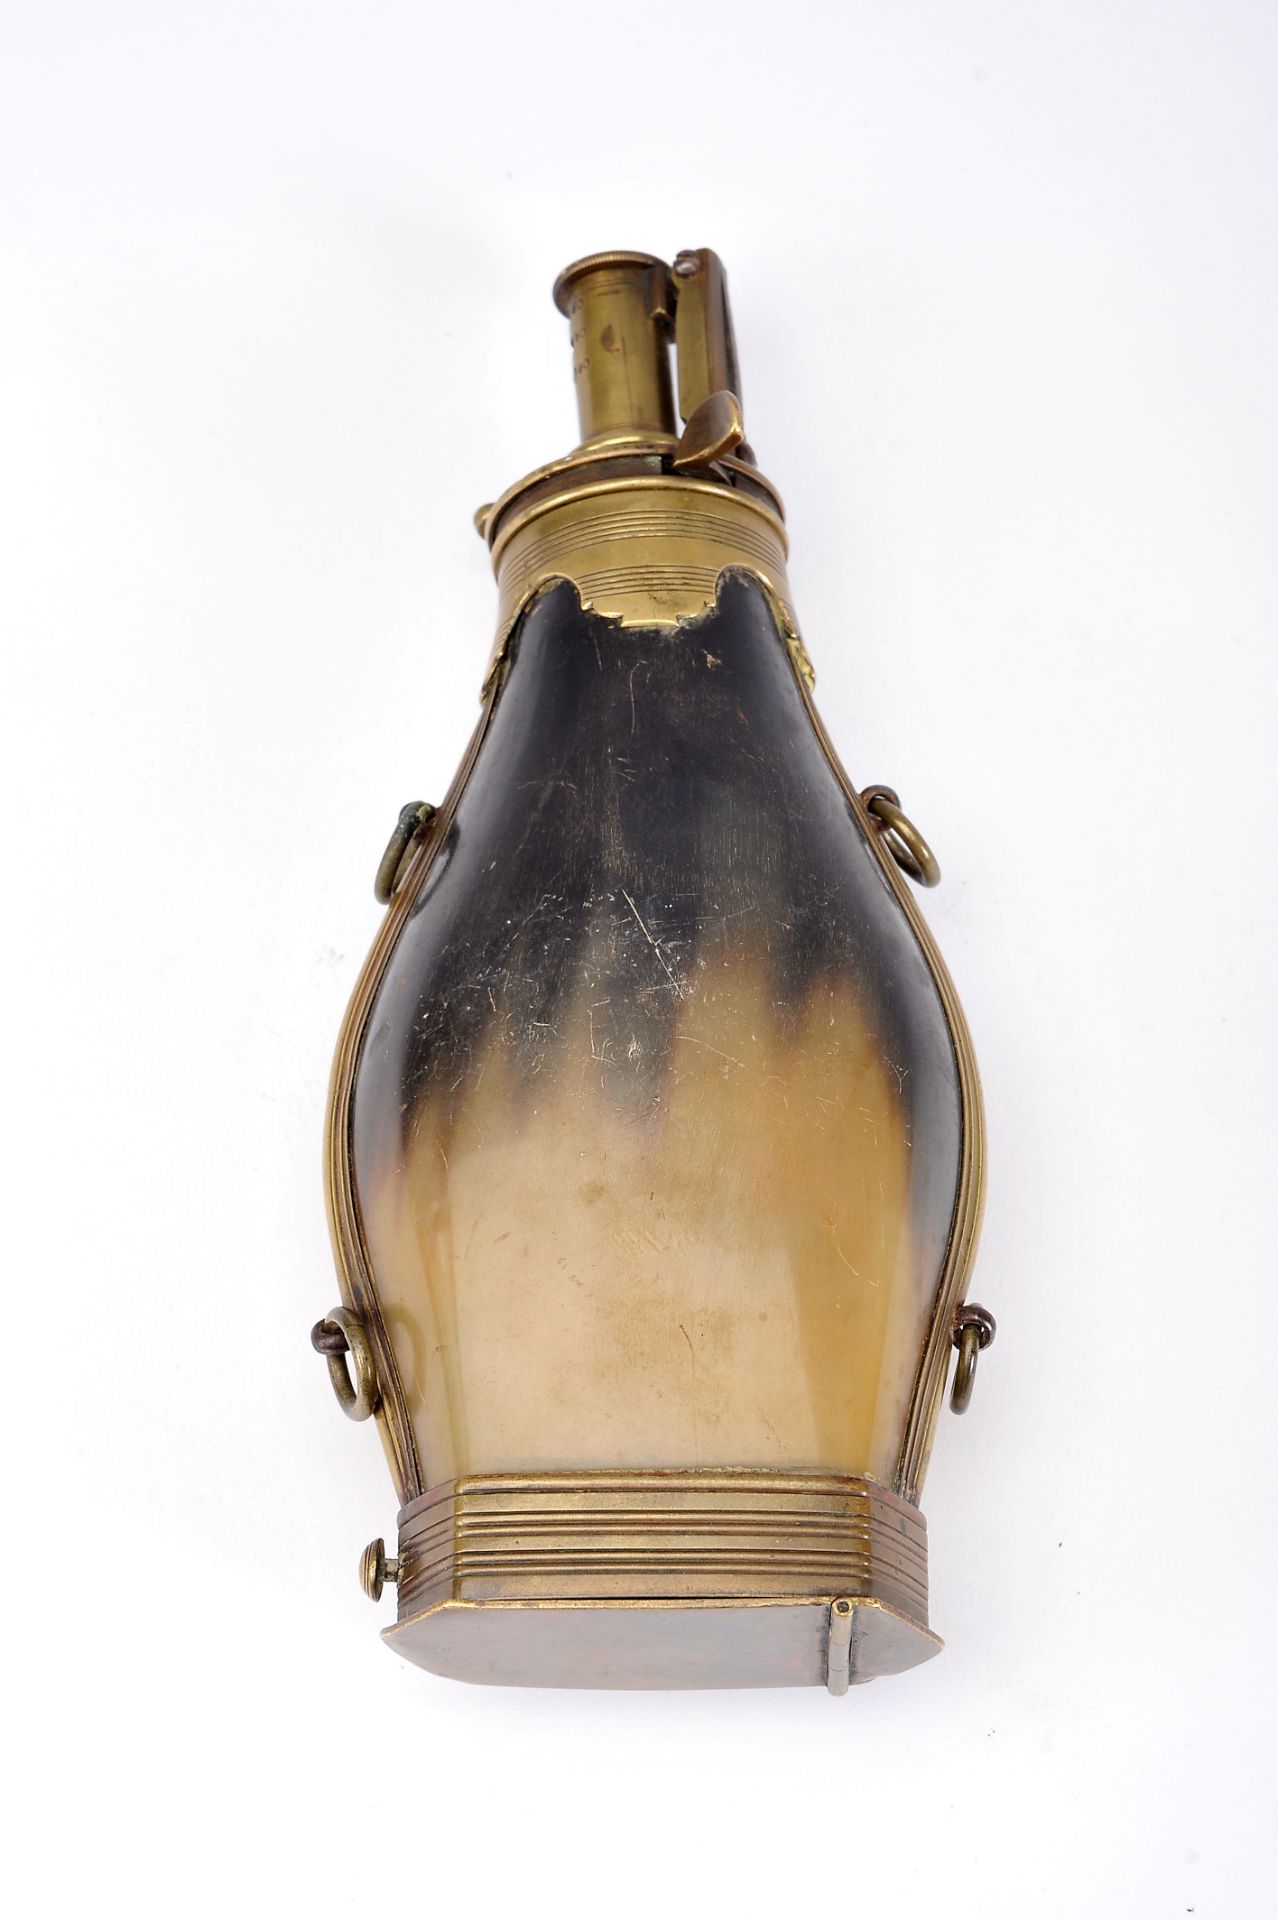 A Powder Flask, horn and yellow metal, bullets chamber, French, 19th C., signs of use, Dim. - 19 cm